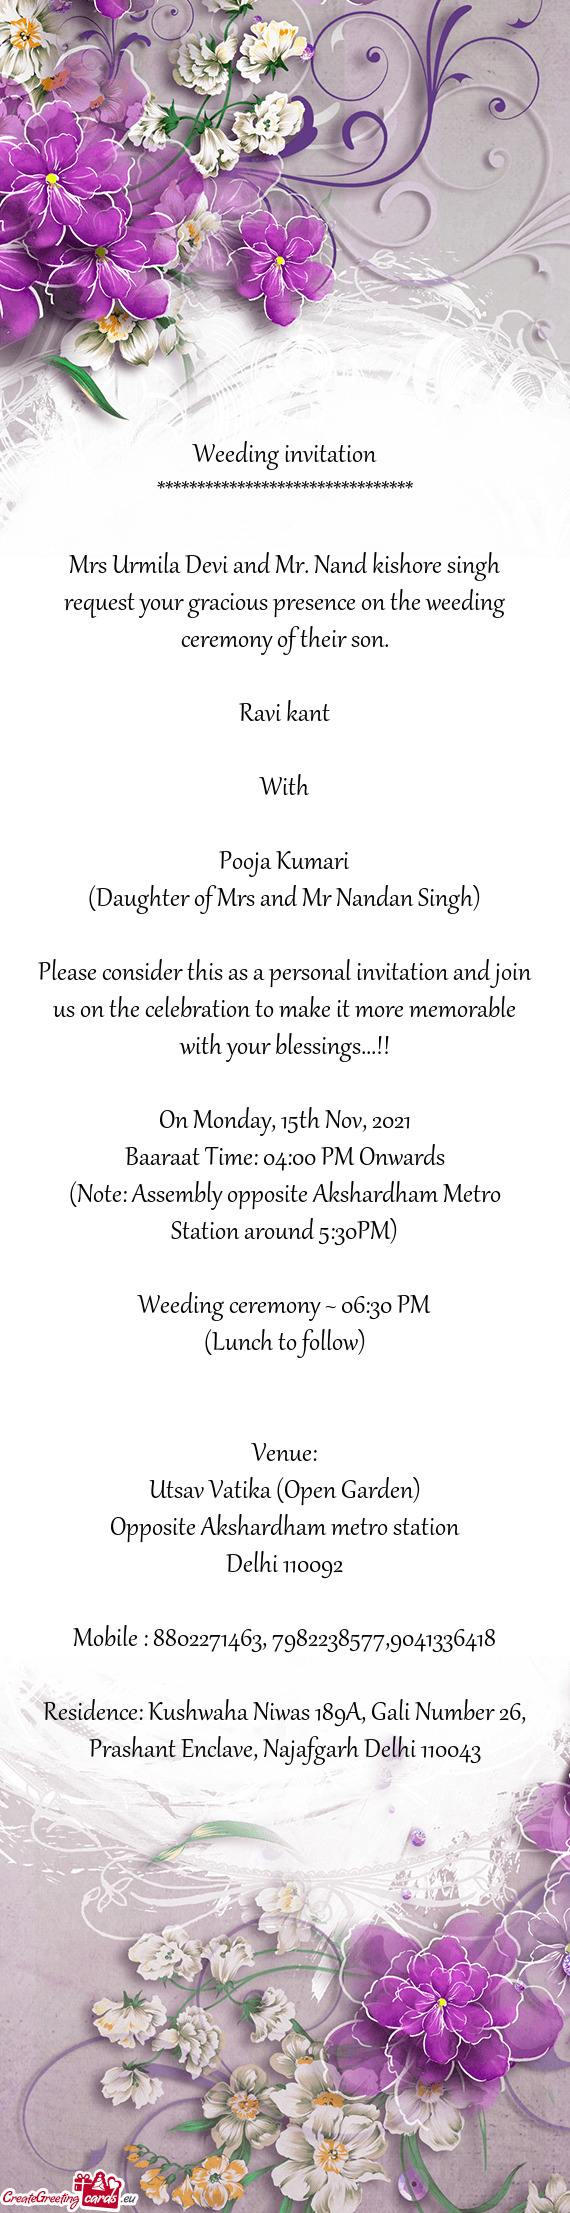 Mrs Urmila Devi and Mr. Nand kishore singh request your gracious presence on the weeding ceremony of